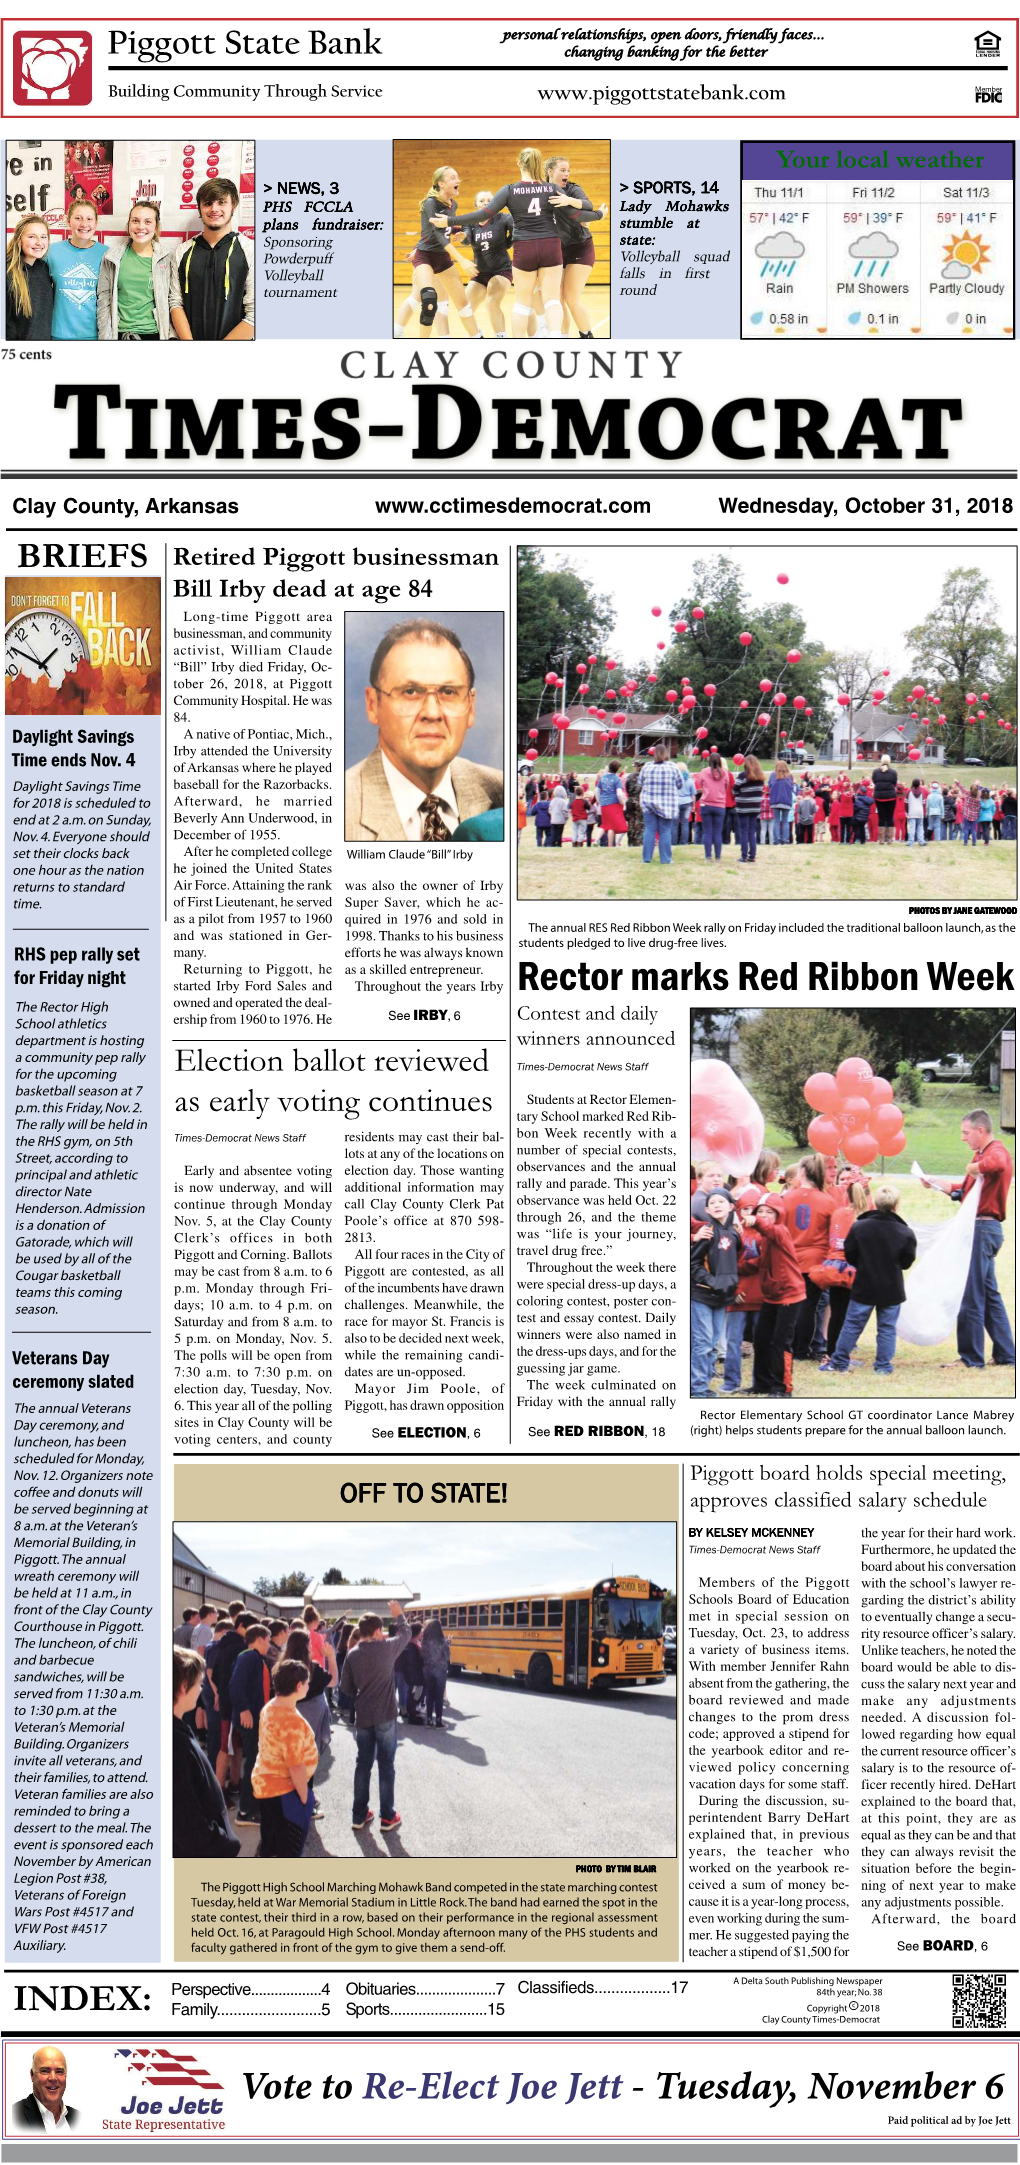 Rector Marks Red Ribbon Week the Rector High Owned and Operated the Deal- See IRBY, 6 School Athletics Ership from 1960 to 1976